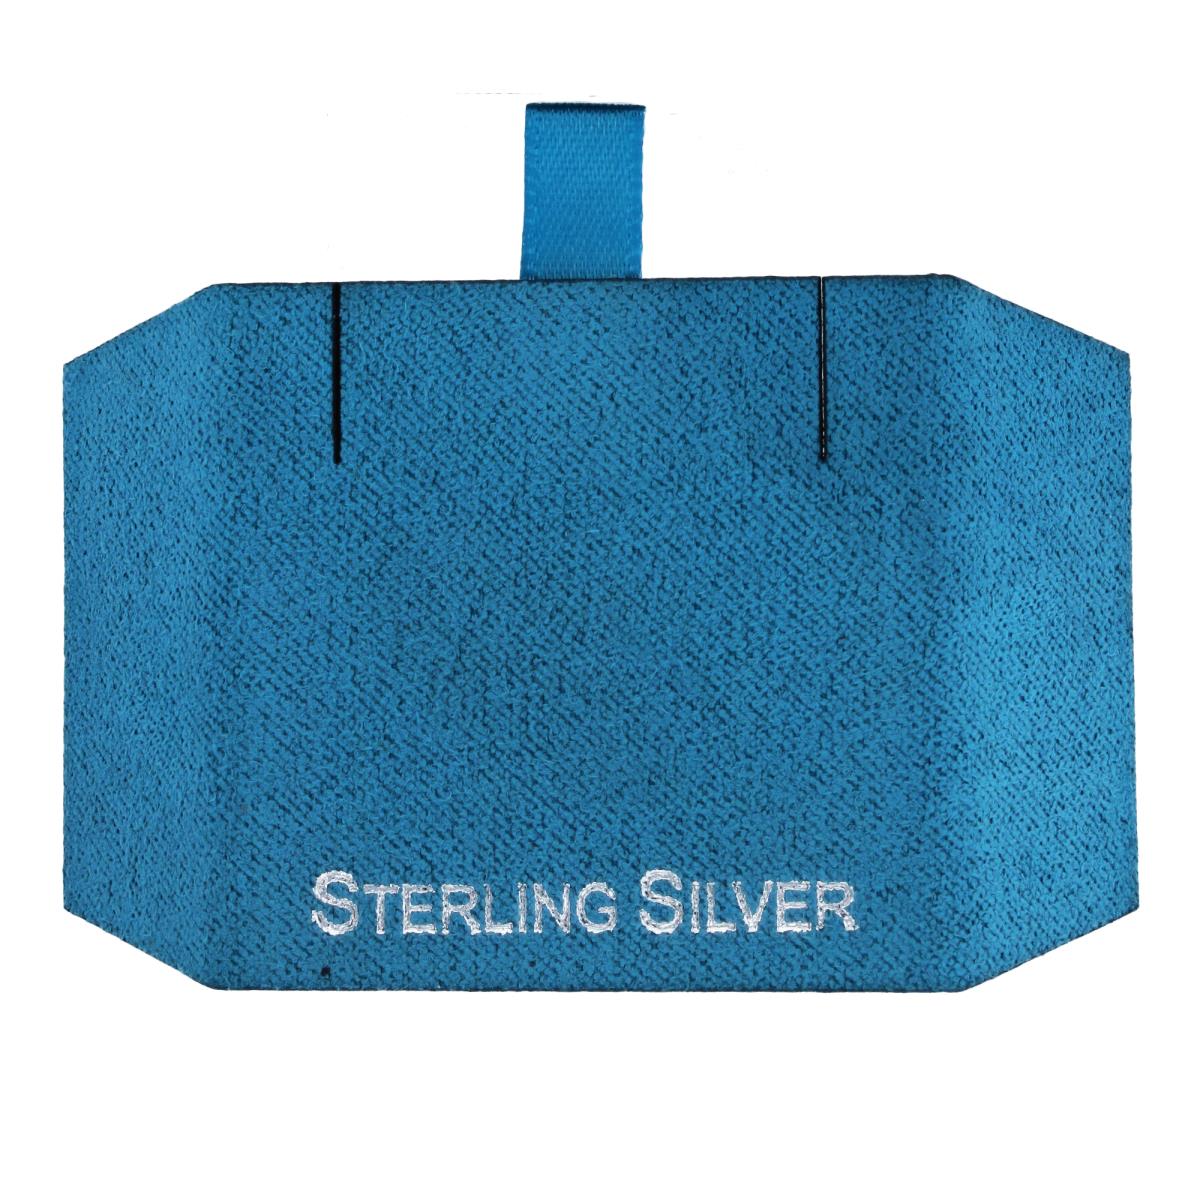 Teal Sterling Silver, Silver Foil Necklace Insert (Box B06-159/Teal/D)